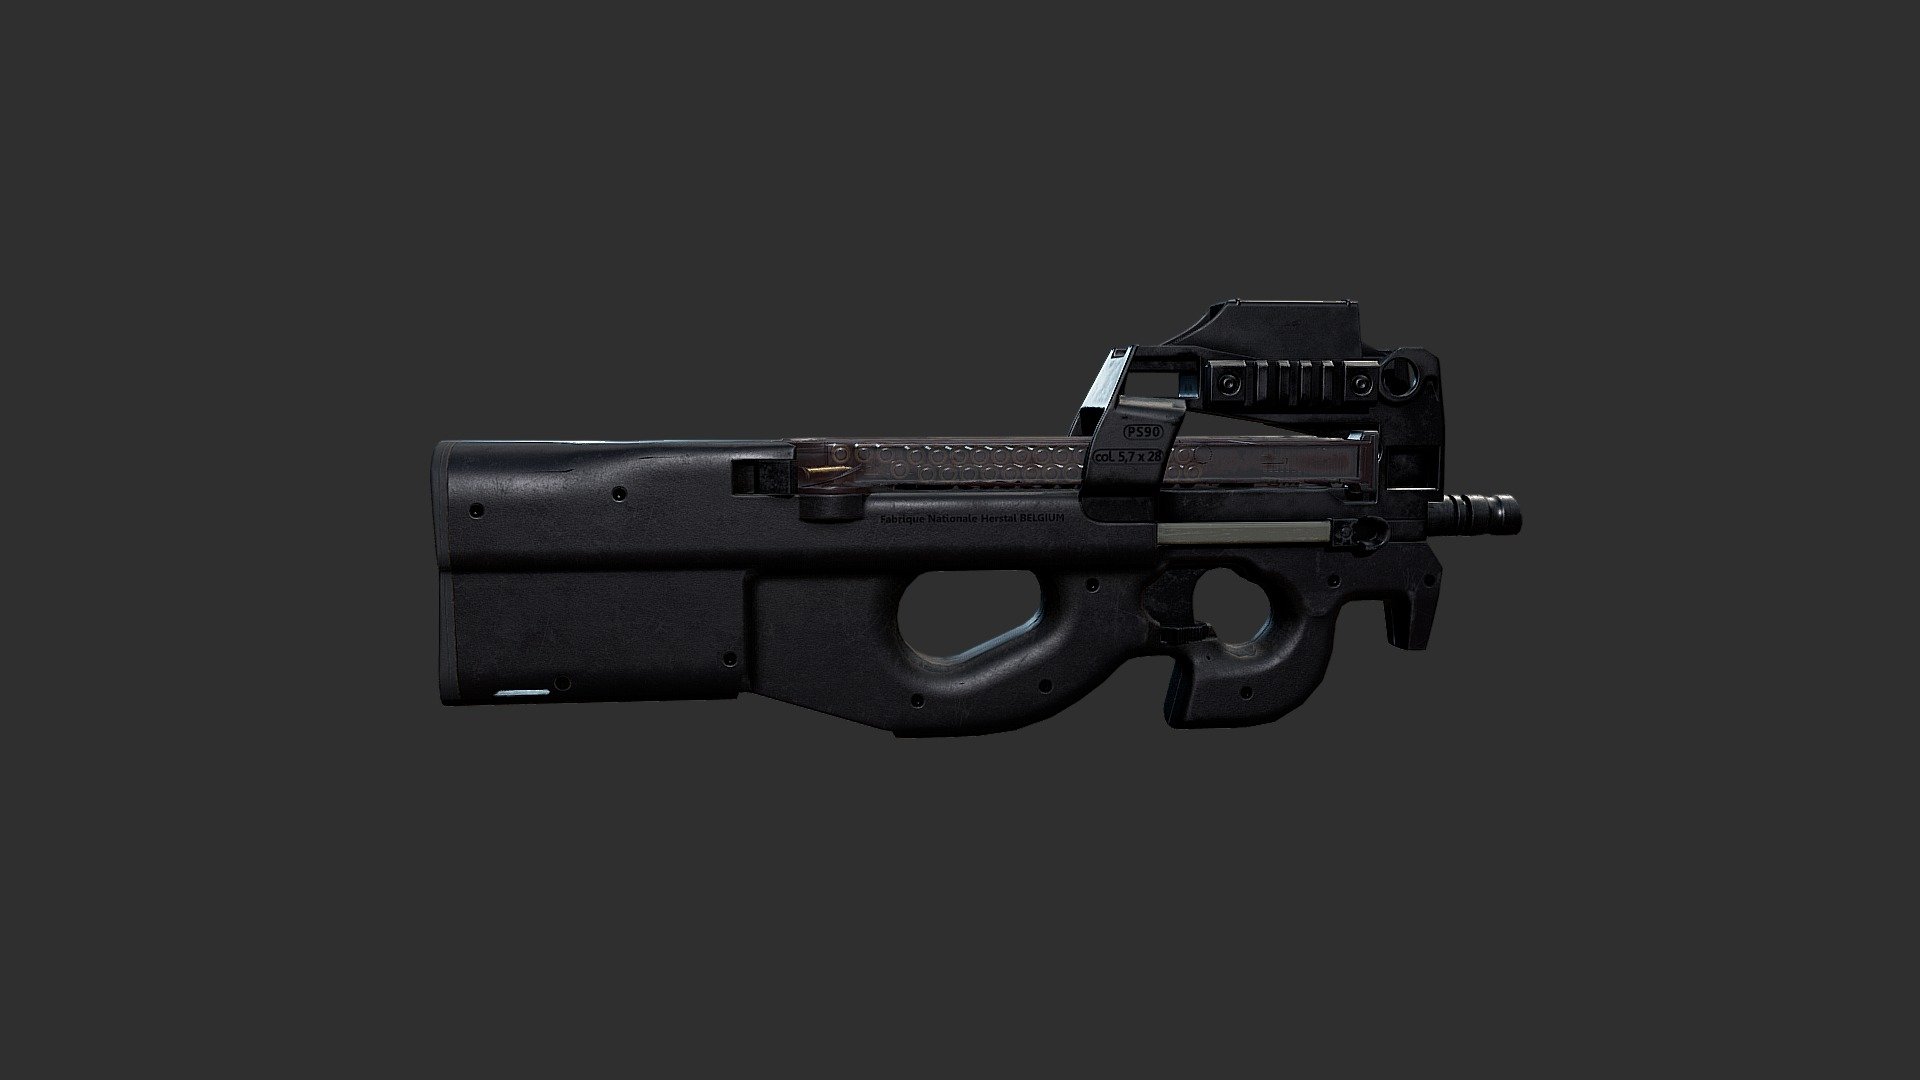 Another weapon which I decided to show on Sketchfab! :D
Hope you like it ;)

Here you can find more:
https://www.artstation.com/artwork/o6Qk4 - P90 - 3D model by Veezen 3d model